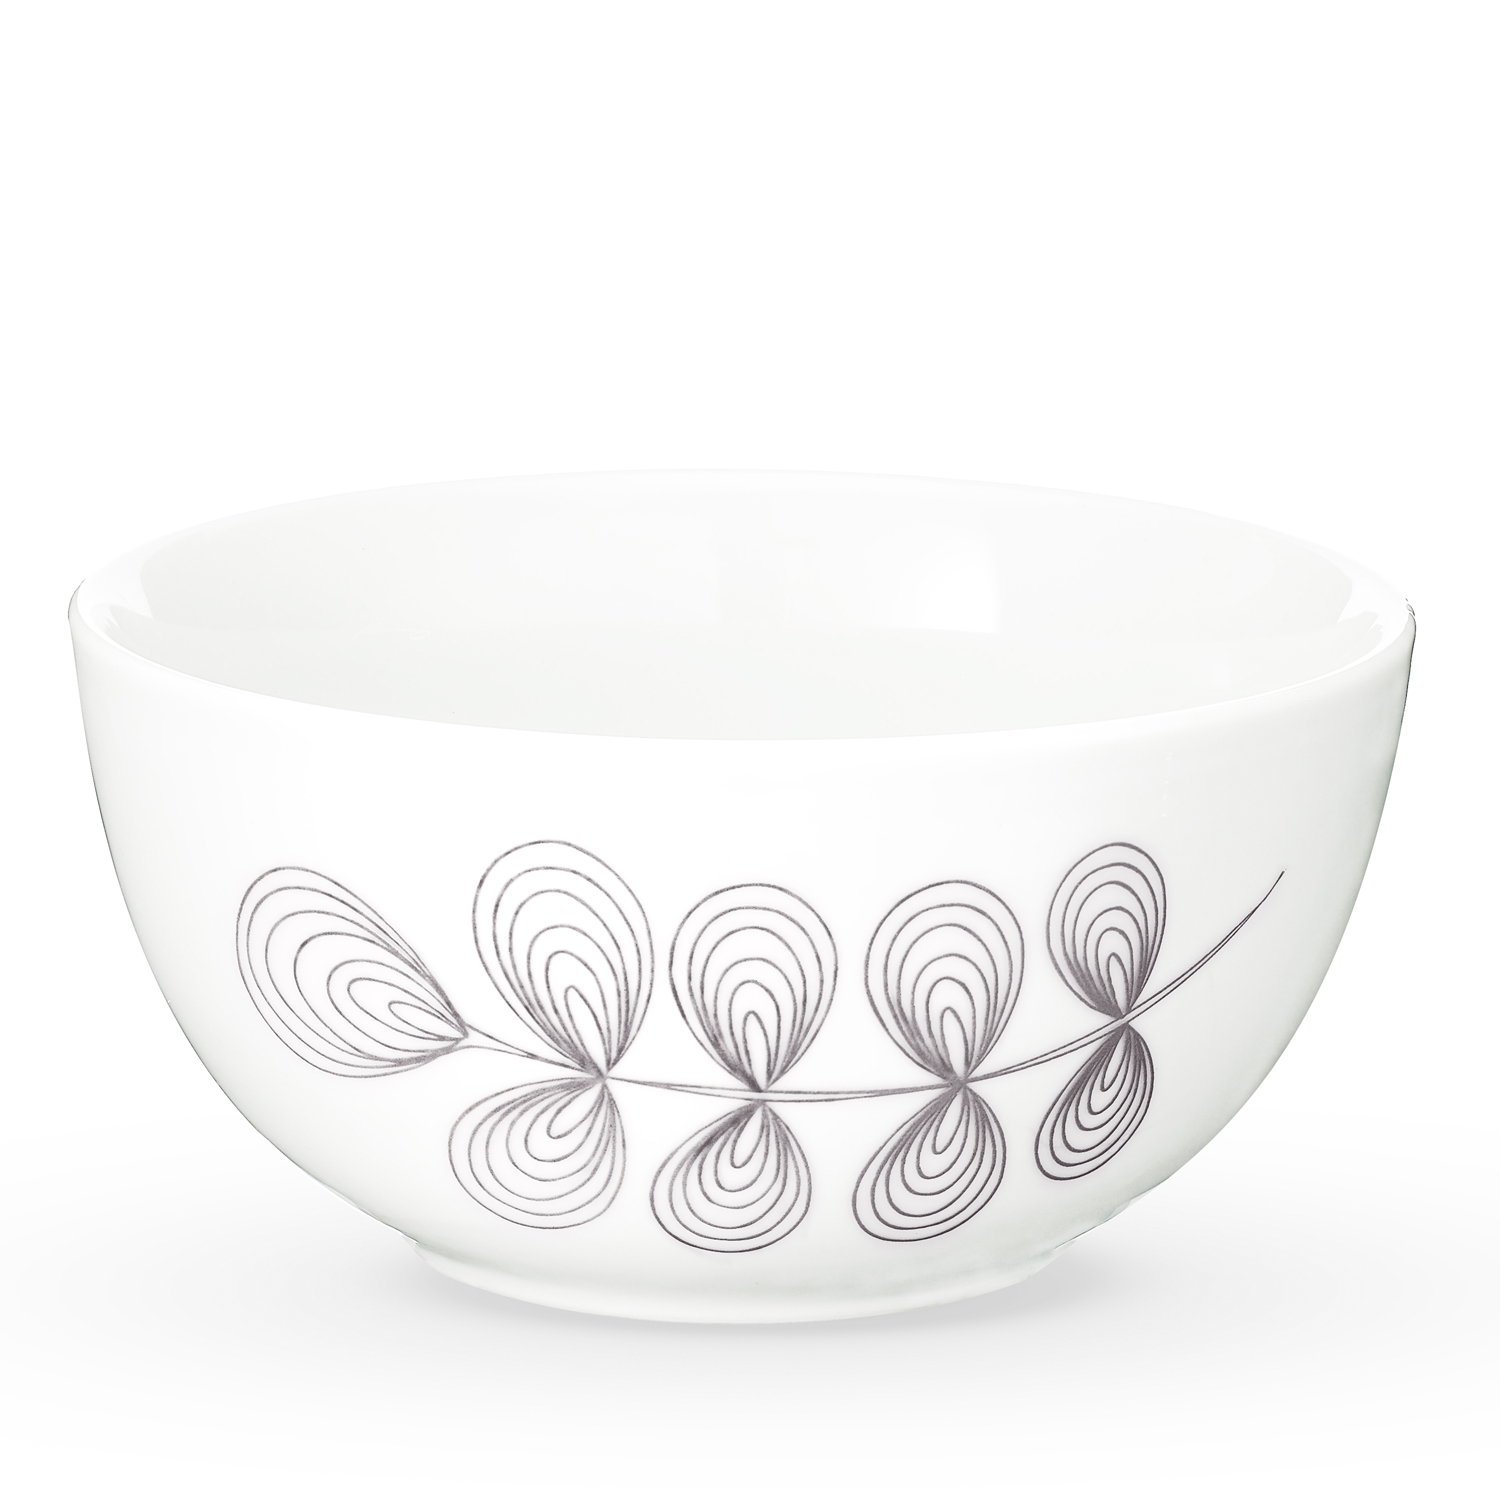 April Floral Collection Taupe 12-Piece Porcelain Dinnerware Set, Walmart Exclusive - image 4 of 5